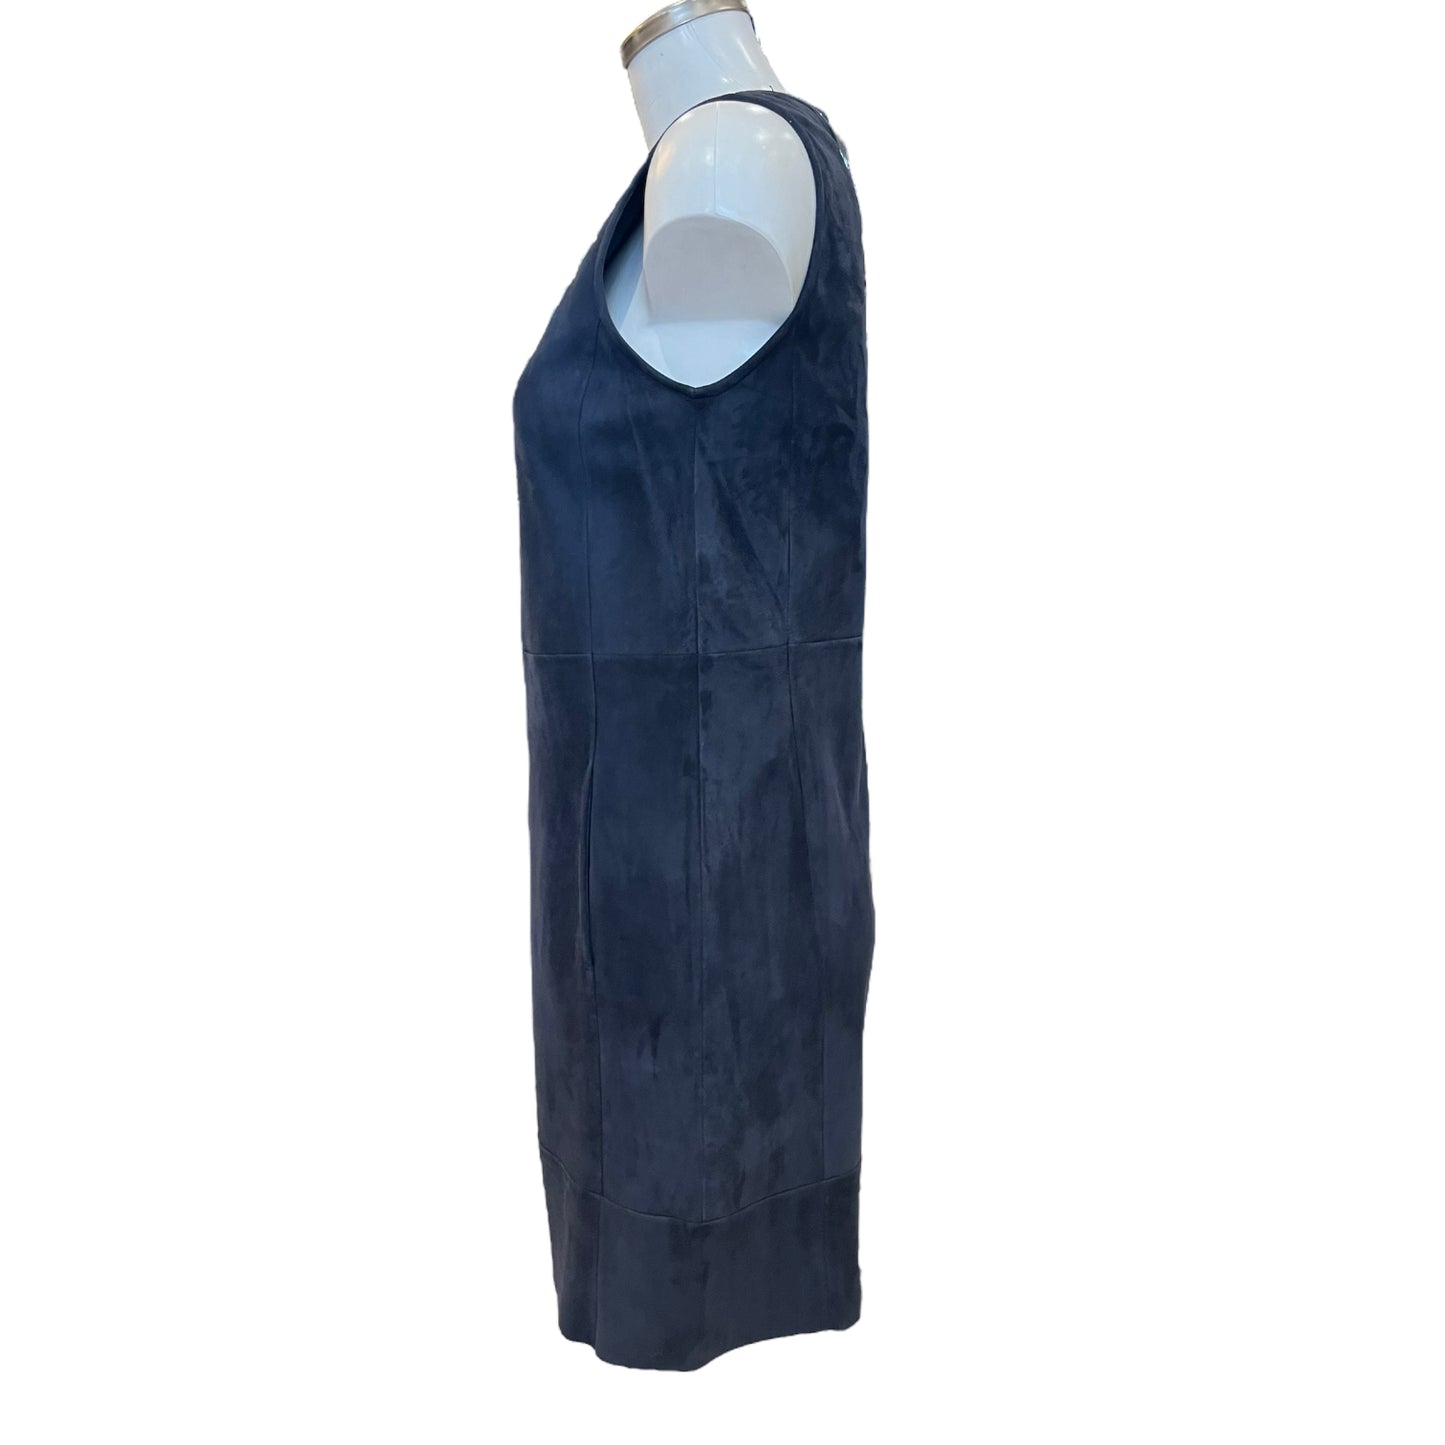 NEW Max Mara Navy Suede Shift Dress, size 8